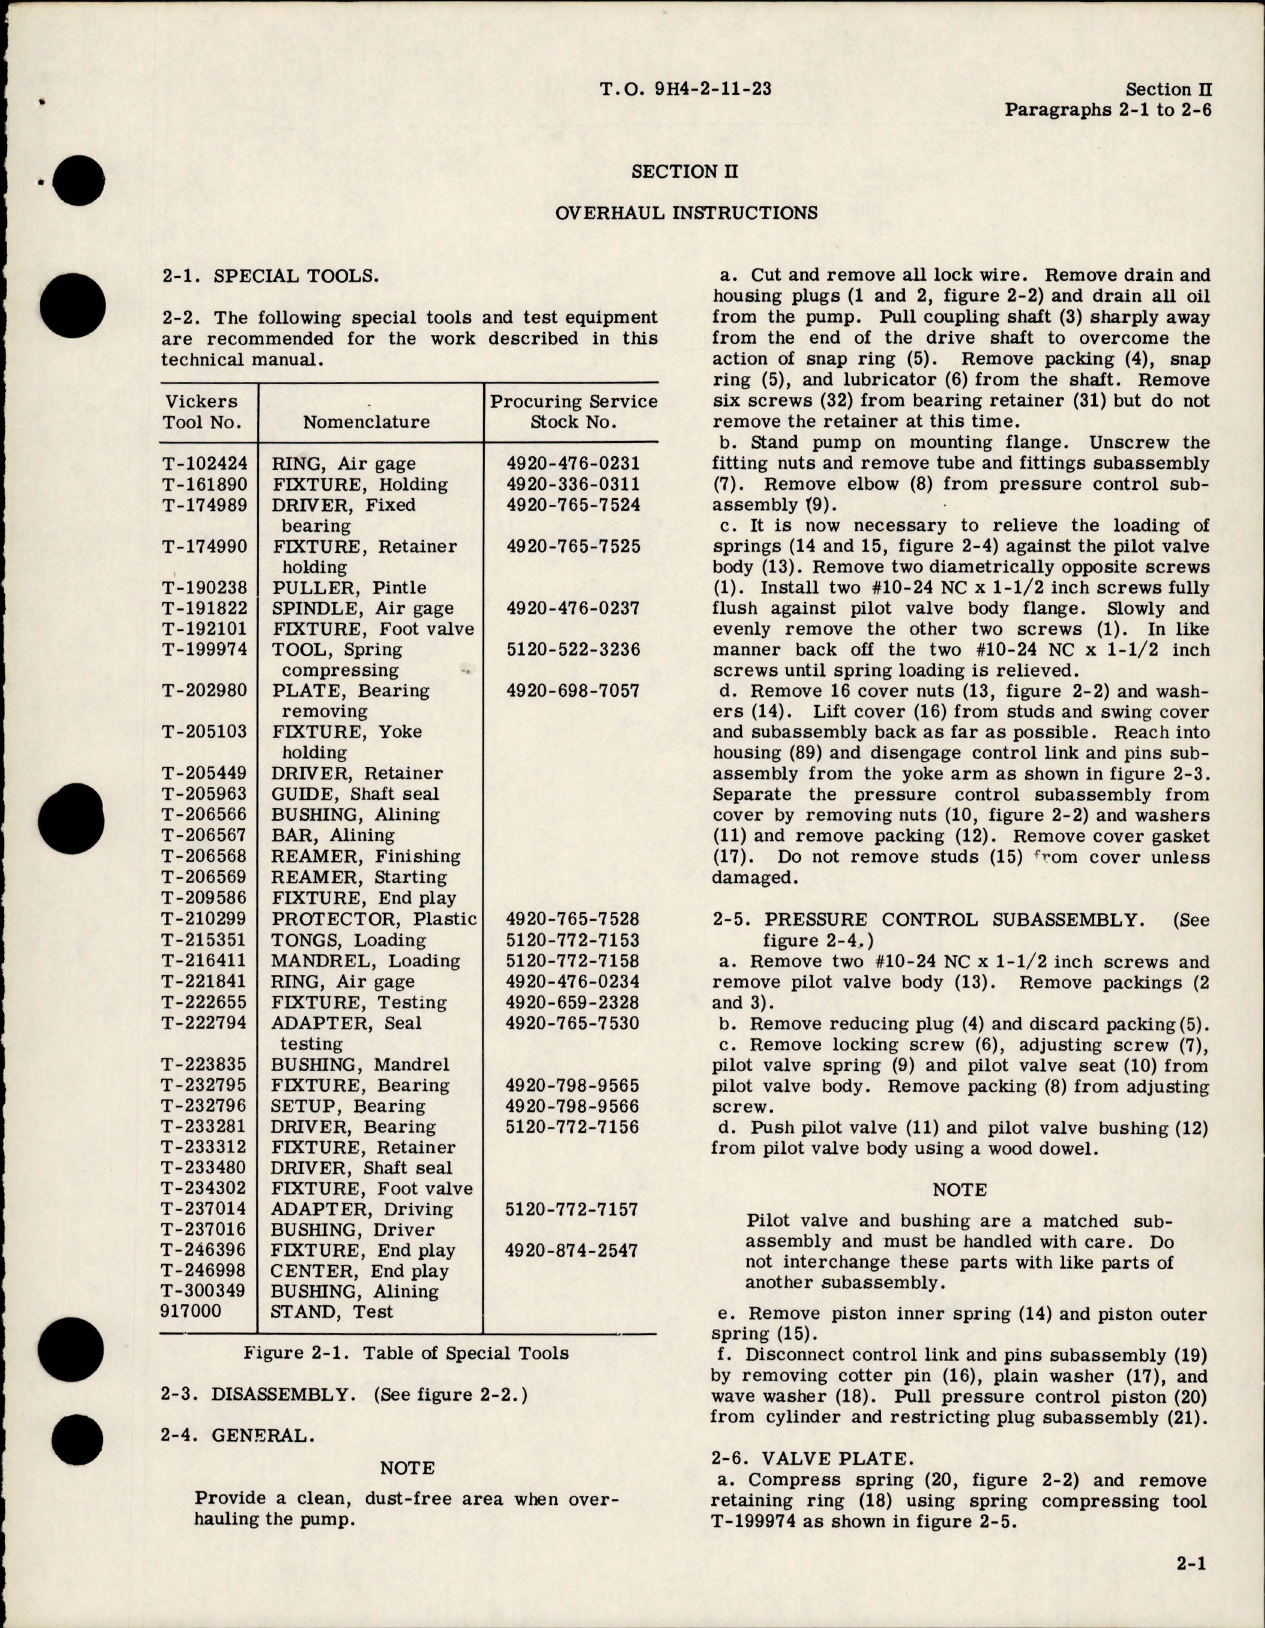 Sample page 7 from AirCorps Library document: Overhaul Instructions for Variable Displacement Hydraulic Pump - AA-20510 Series 